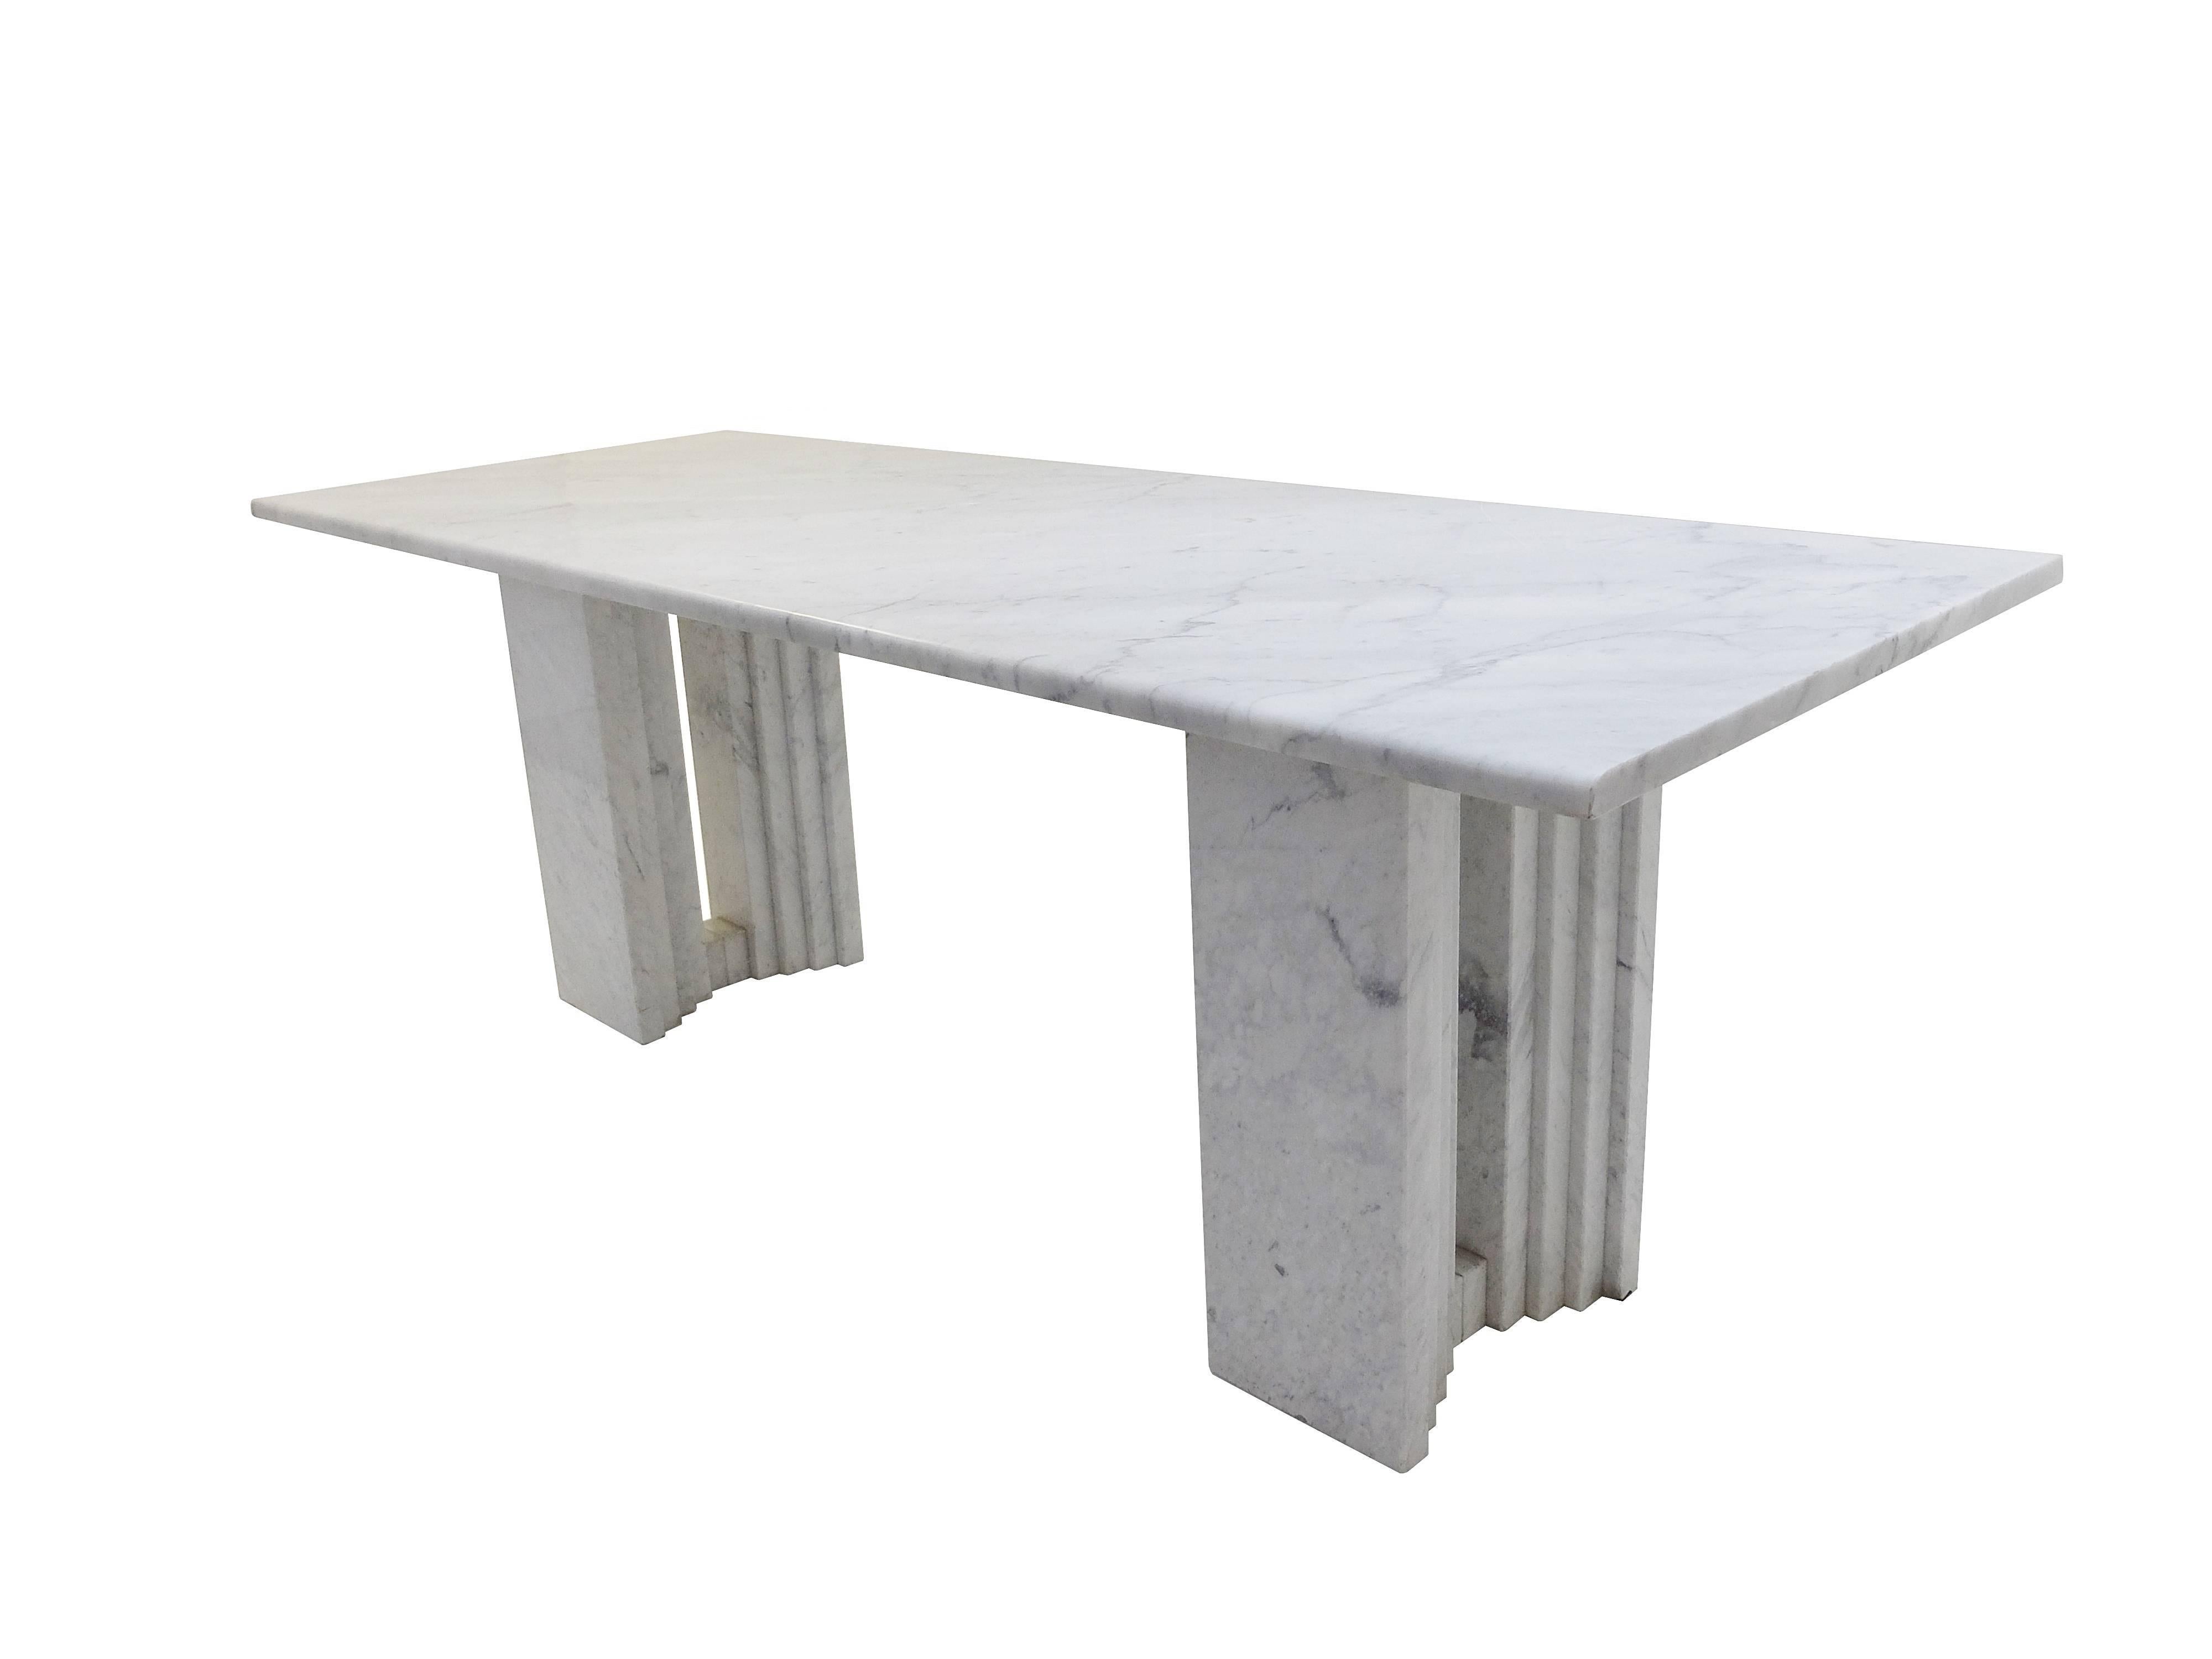 Carlo Scarpa dining table in Carrara marble, Italy, 1970s.